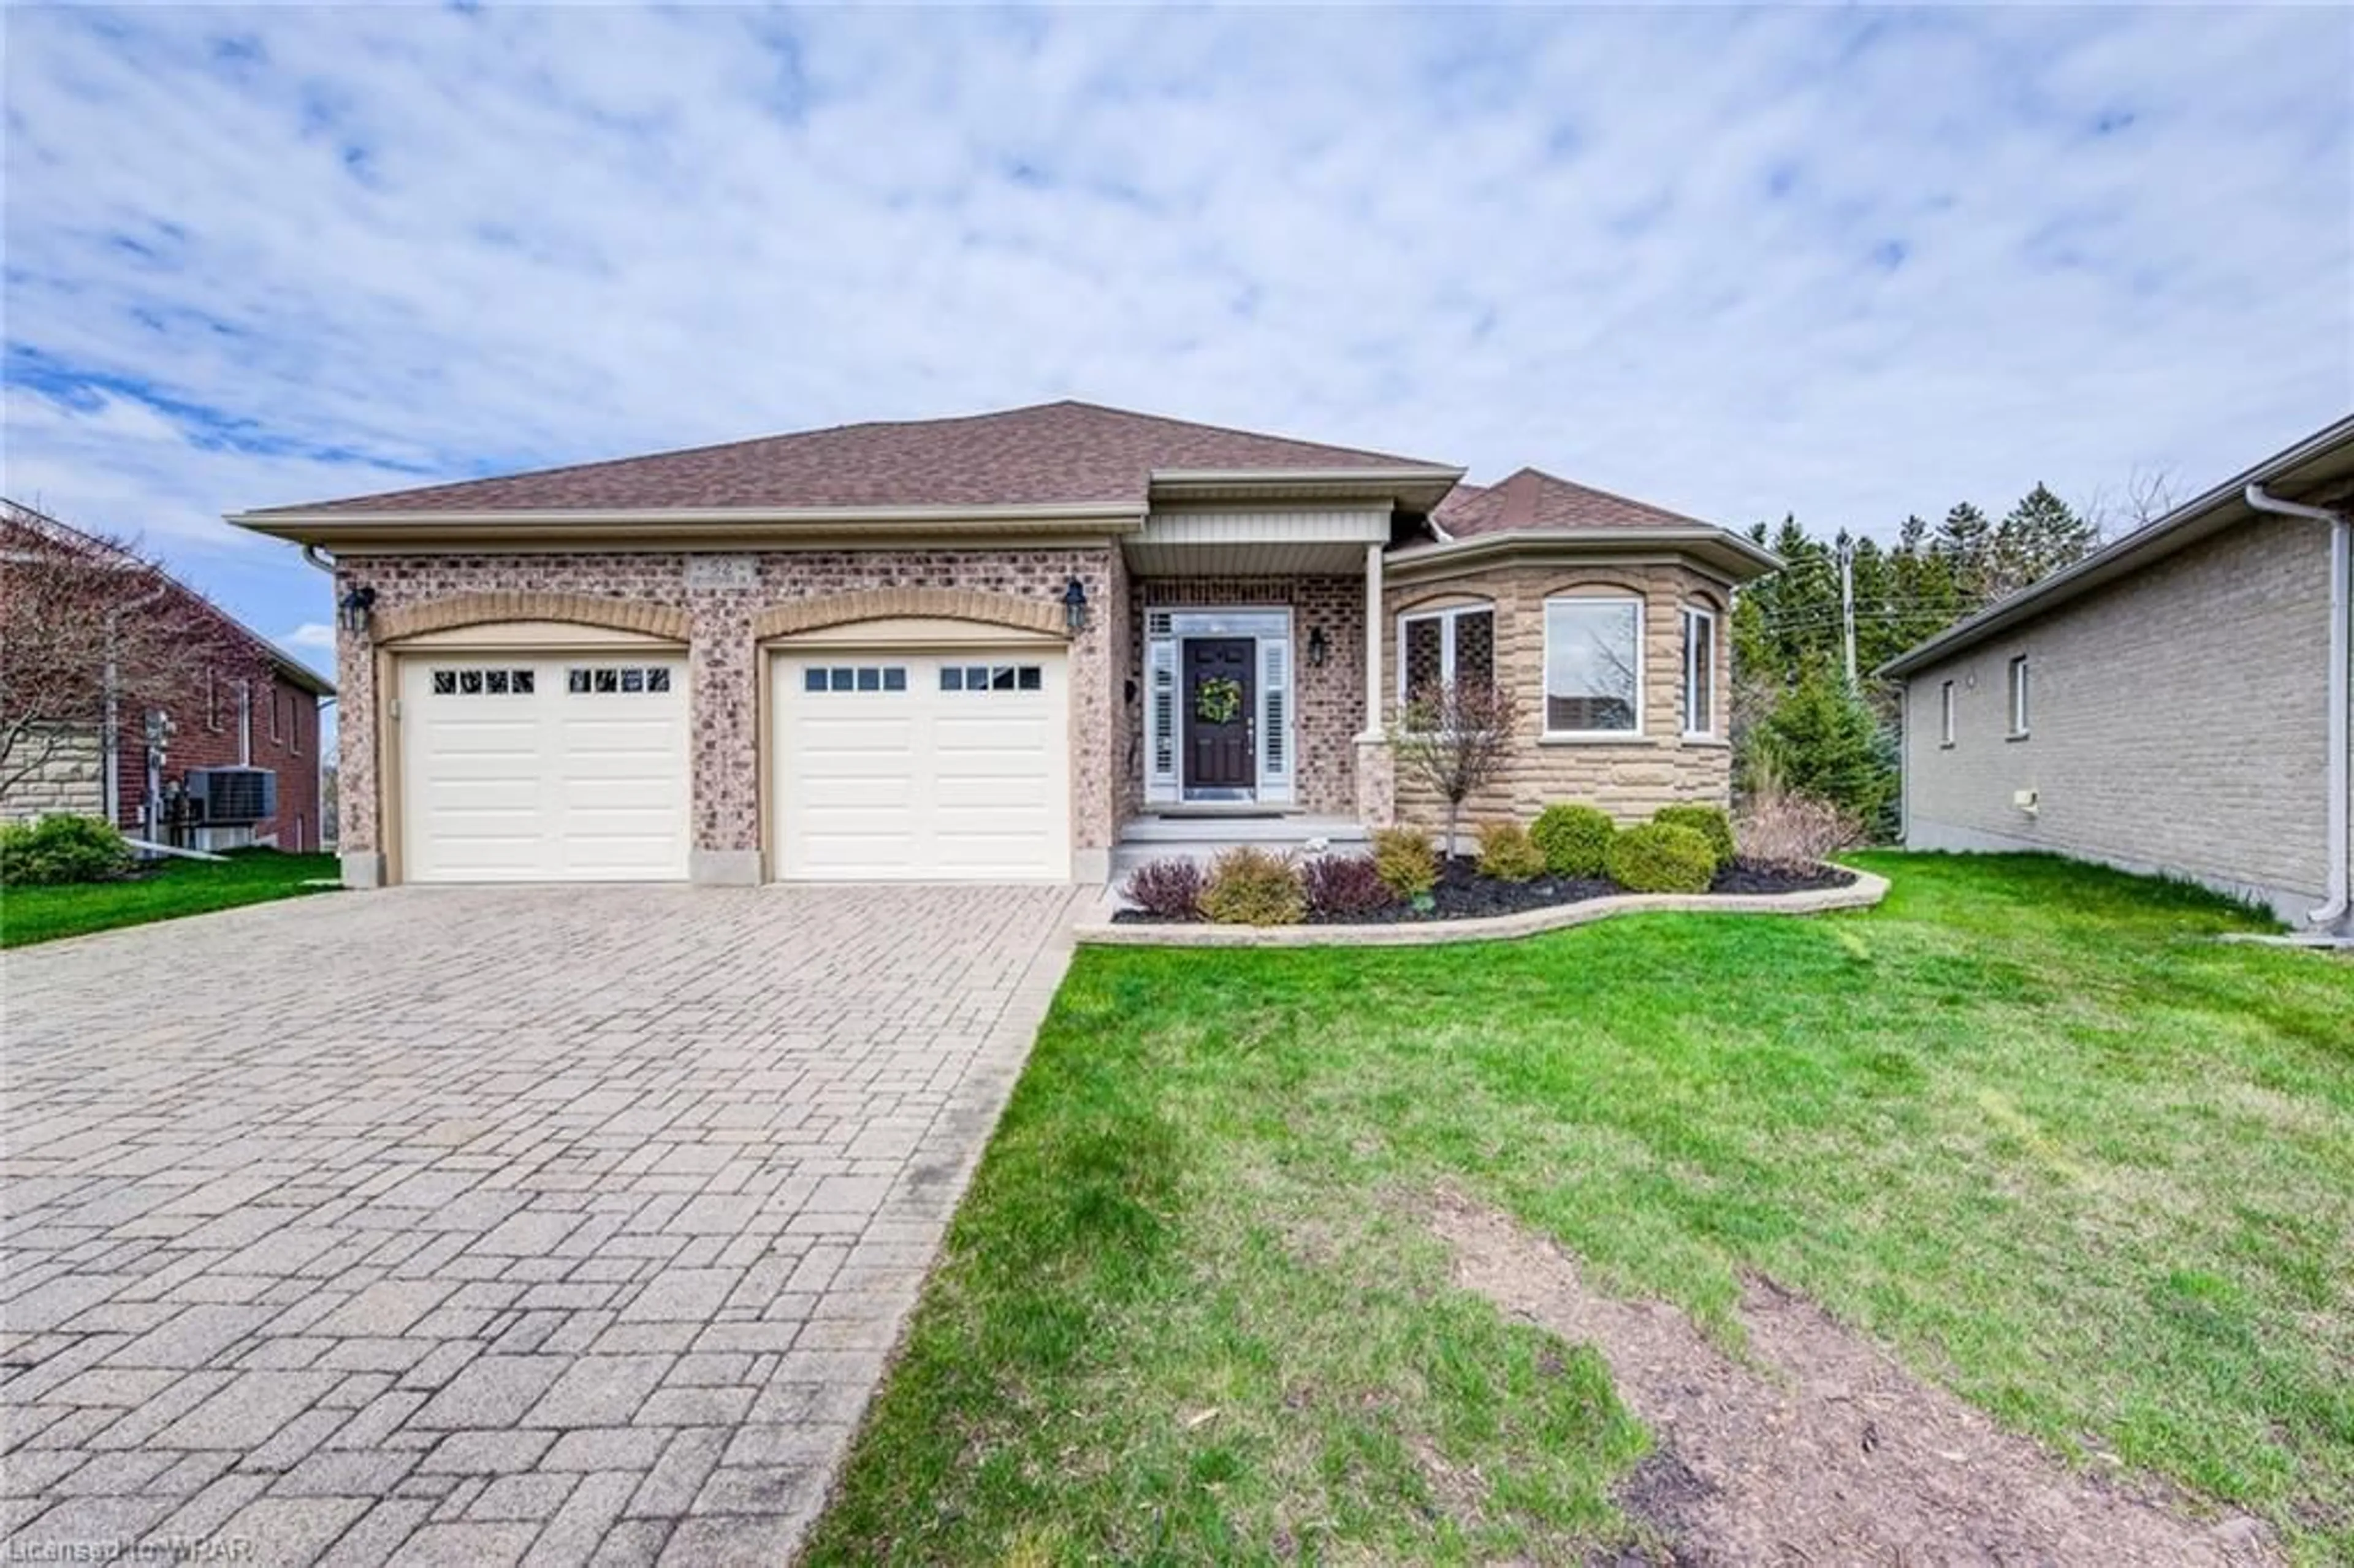 Home with brick exterior material for 52 Devonshire Dr, New Hamburg Ontario N3A 4J7